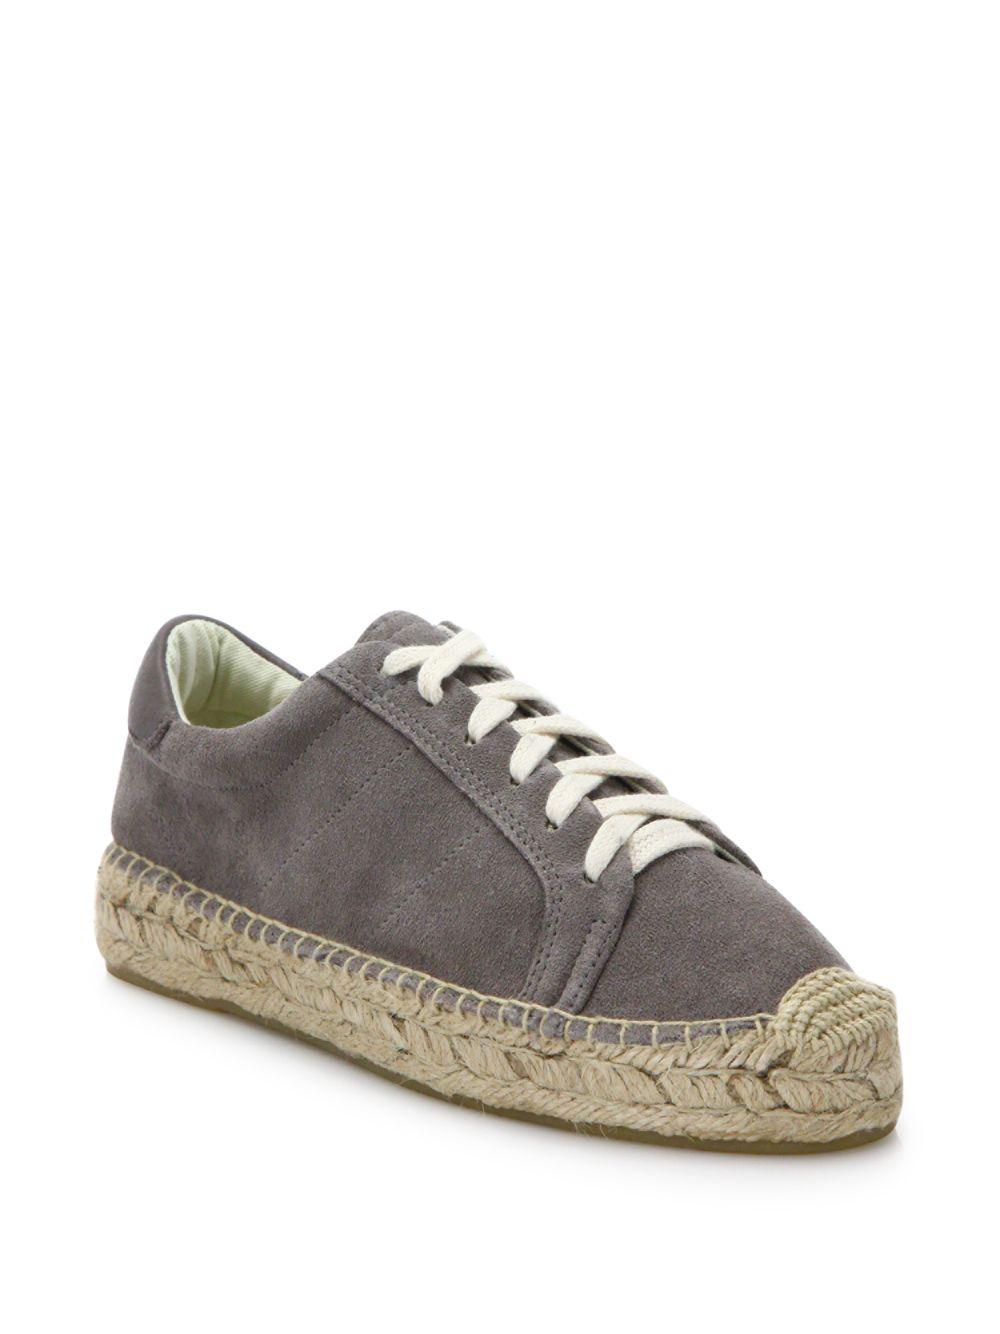 Lyst - Soludos Canvas Lace-up Espadrille Platform Sneakers in Gray ...